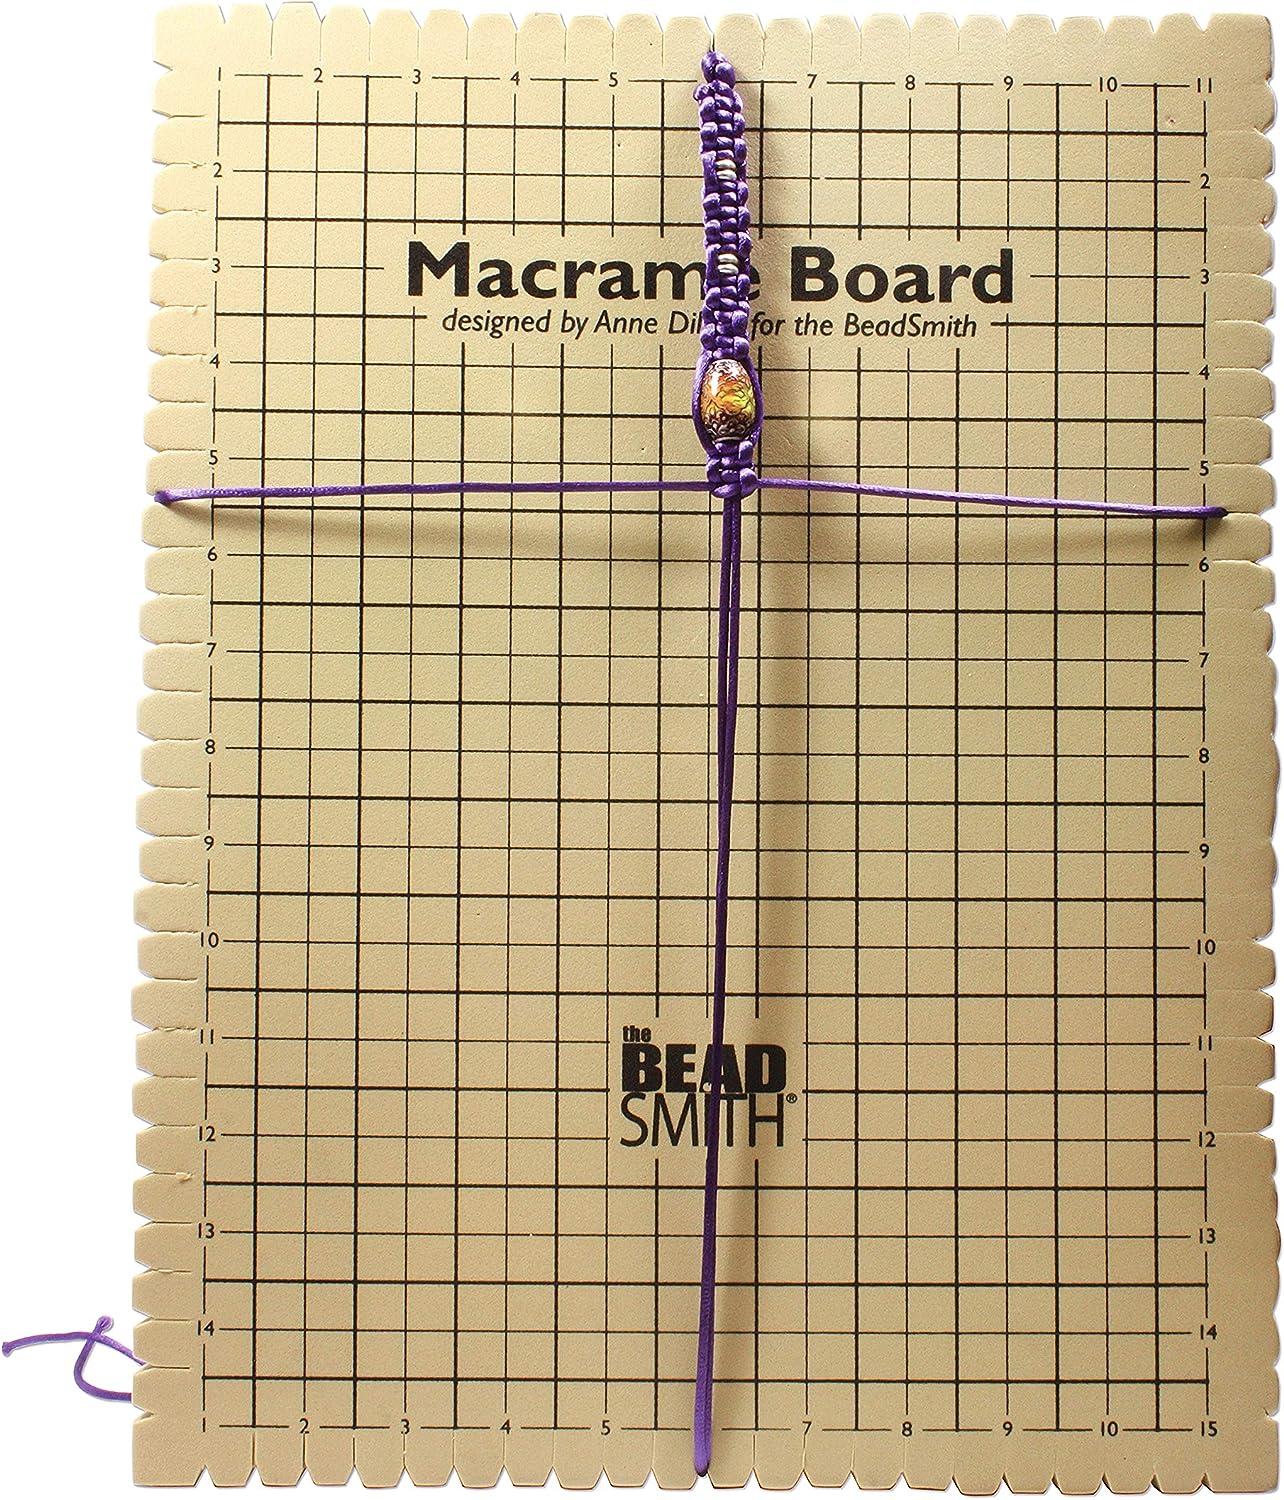 The Beadsmith Mini Macrame Board, 7.5 x 10.5 inches, 0.5 inch thick foam, 6  x 9 grid for measuring, bracelet project with instructions included,  create macrame and knotting creations 